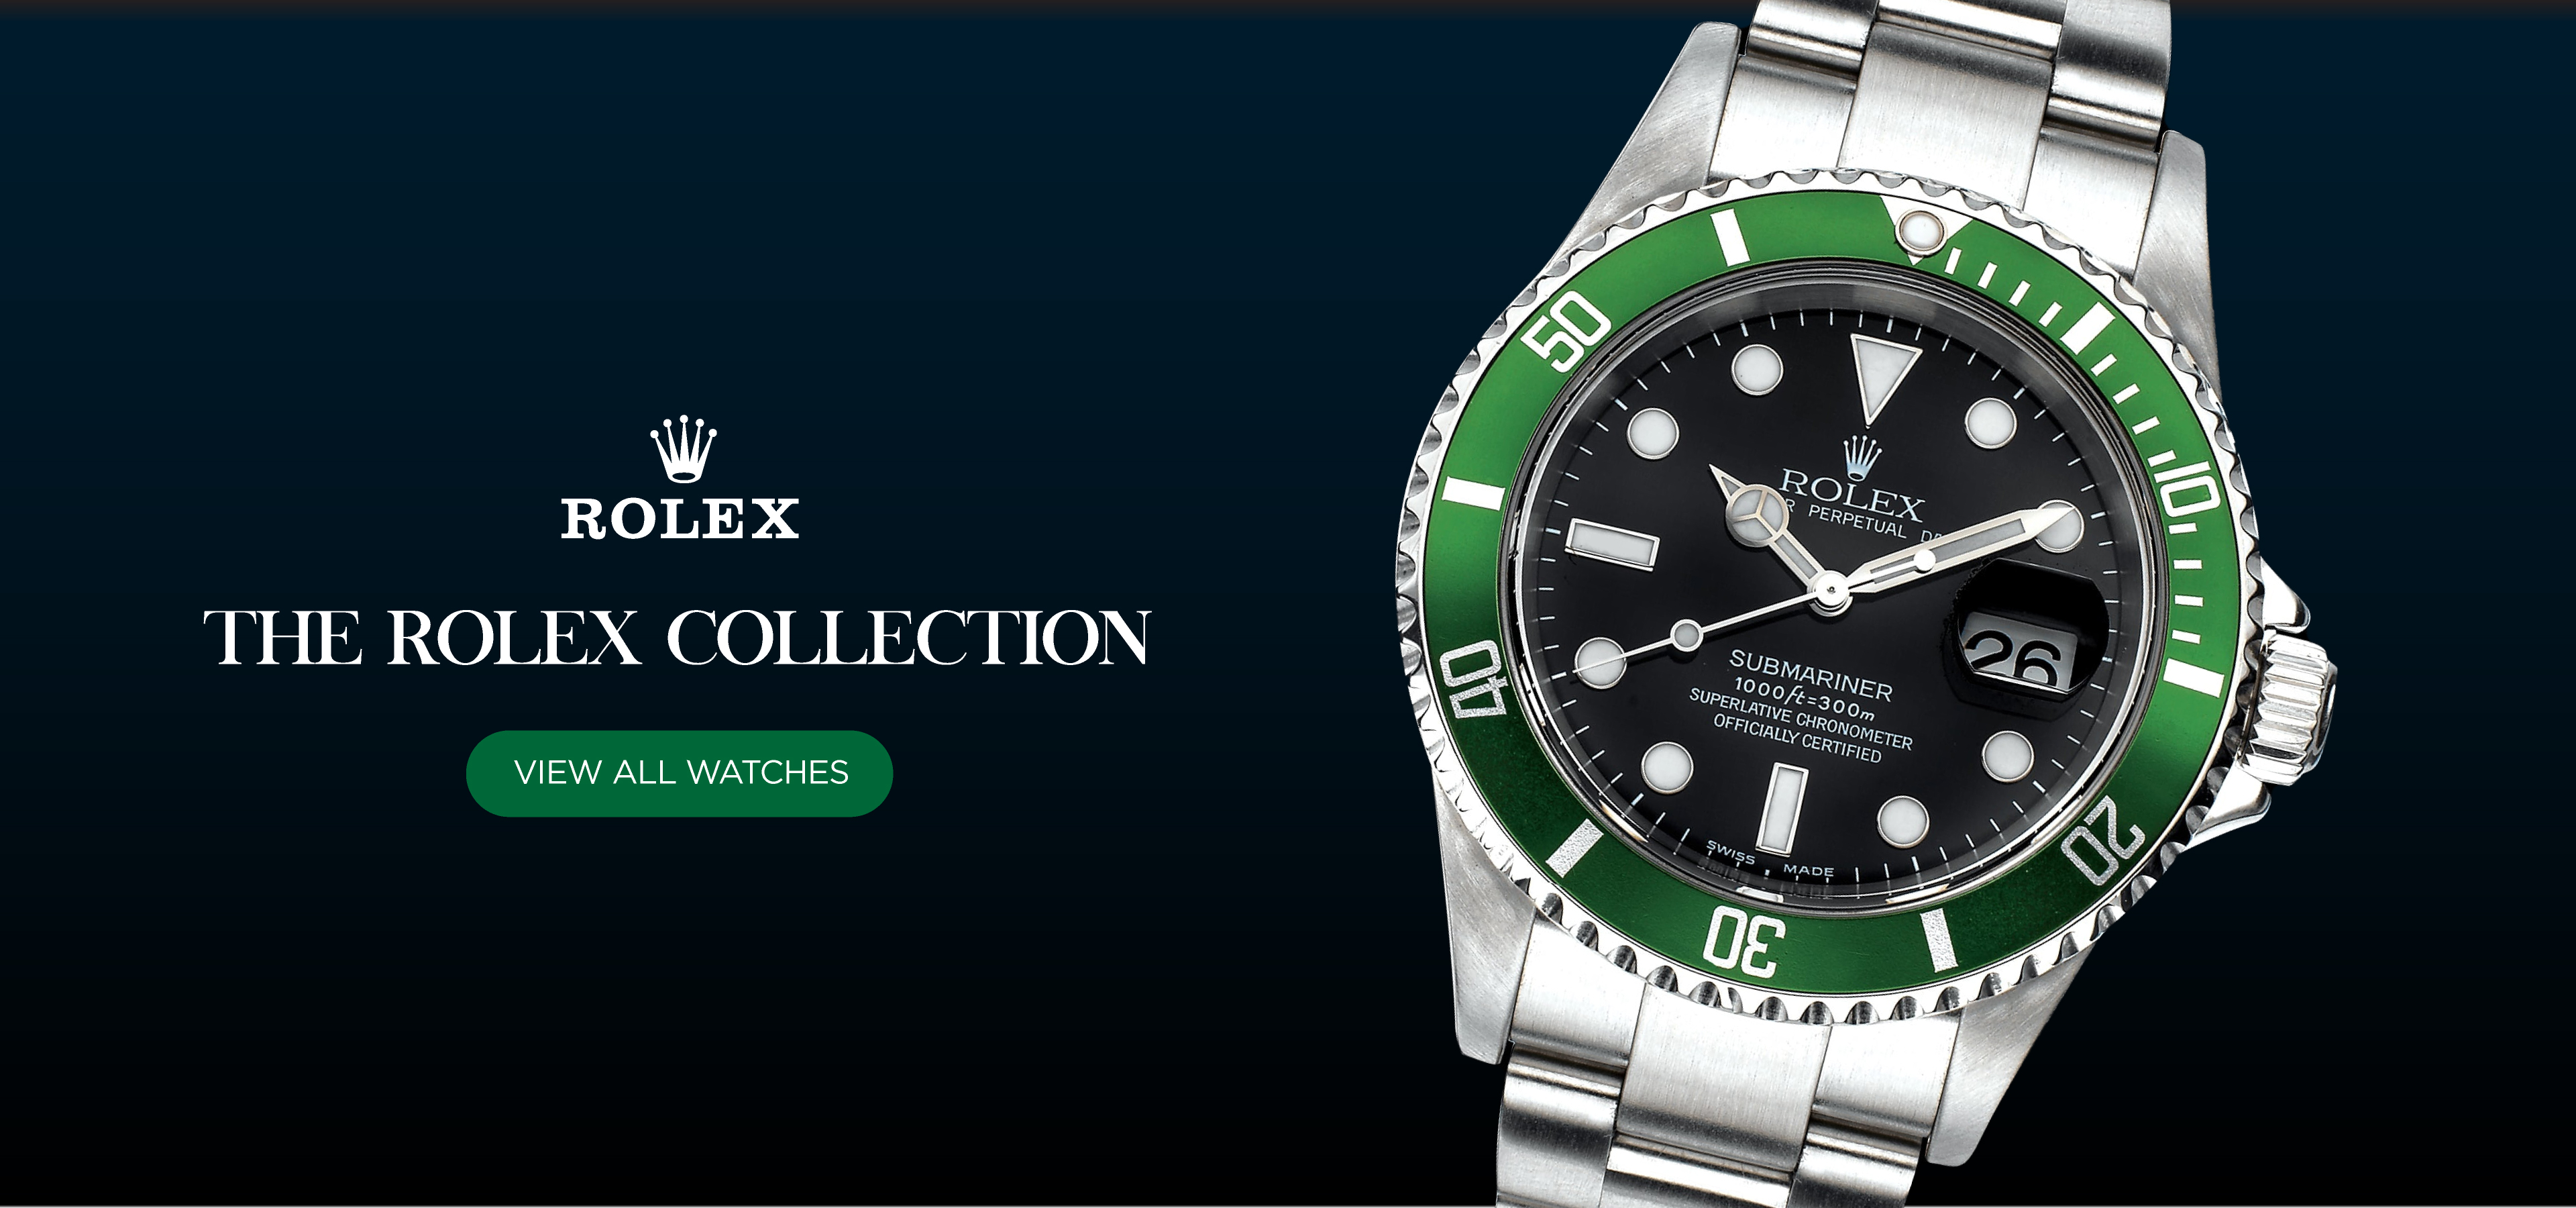 Time & Times Lux Empire - The Rolex Collection